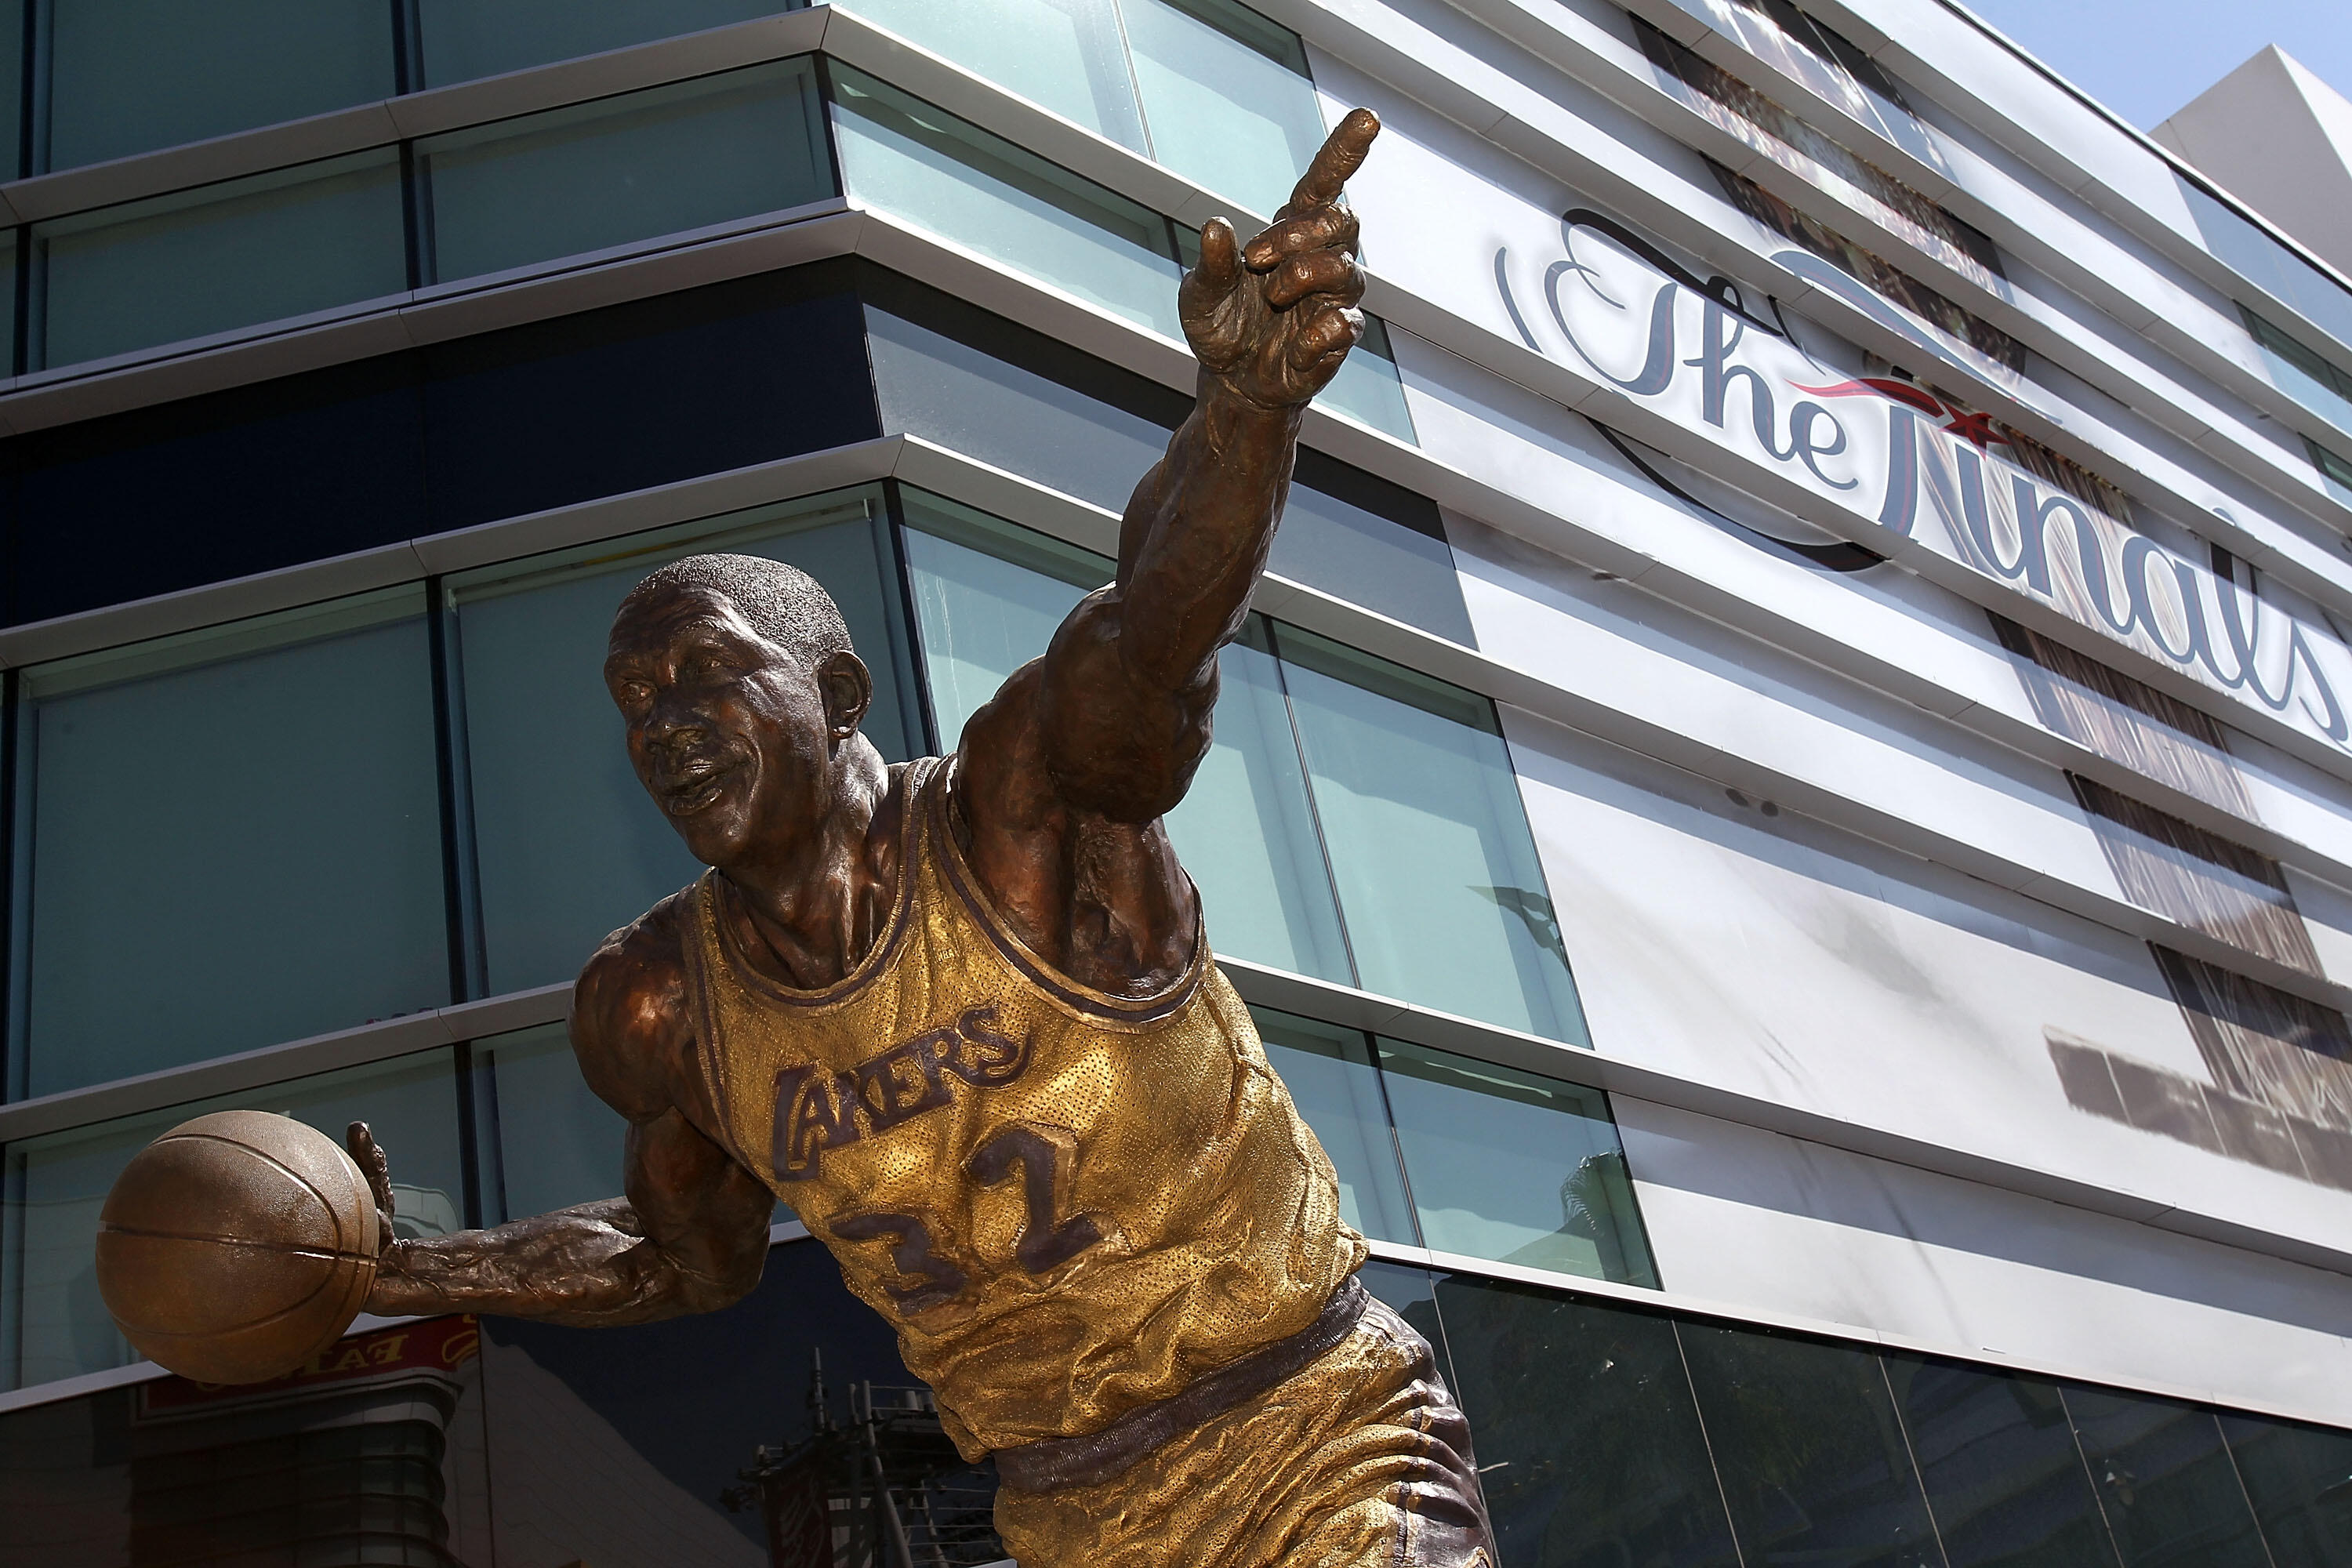 LOS ANGELES, CA - JUNE 06:  A statue of Los Angeles Lakers' legend Magic Johnson is shown outside of Staples Center before Game Two of the 2010 NBA Finals between the Boston Celtics and the Los Angeles Lakers on June 6, 2010 in Los Angeles, California. NO